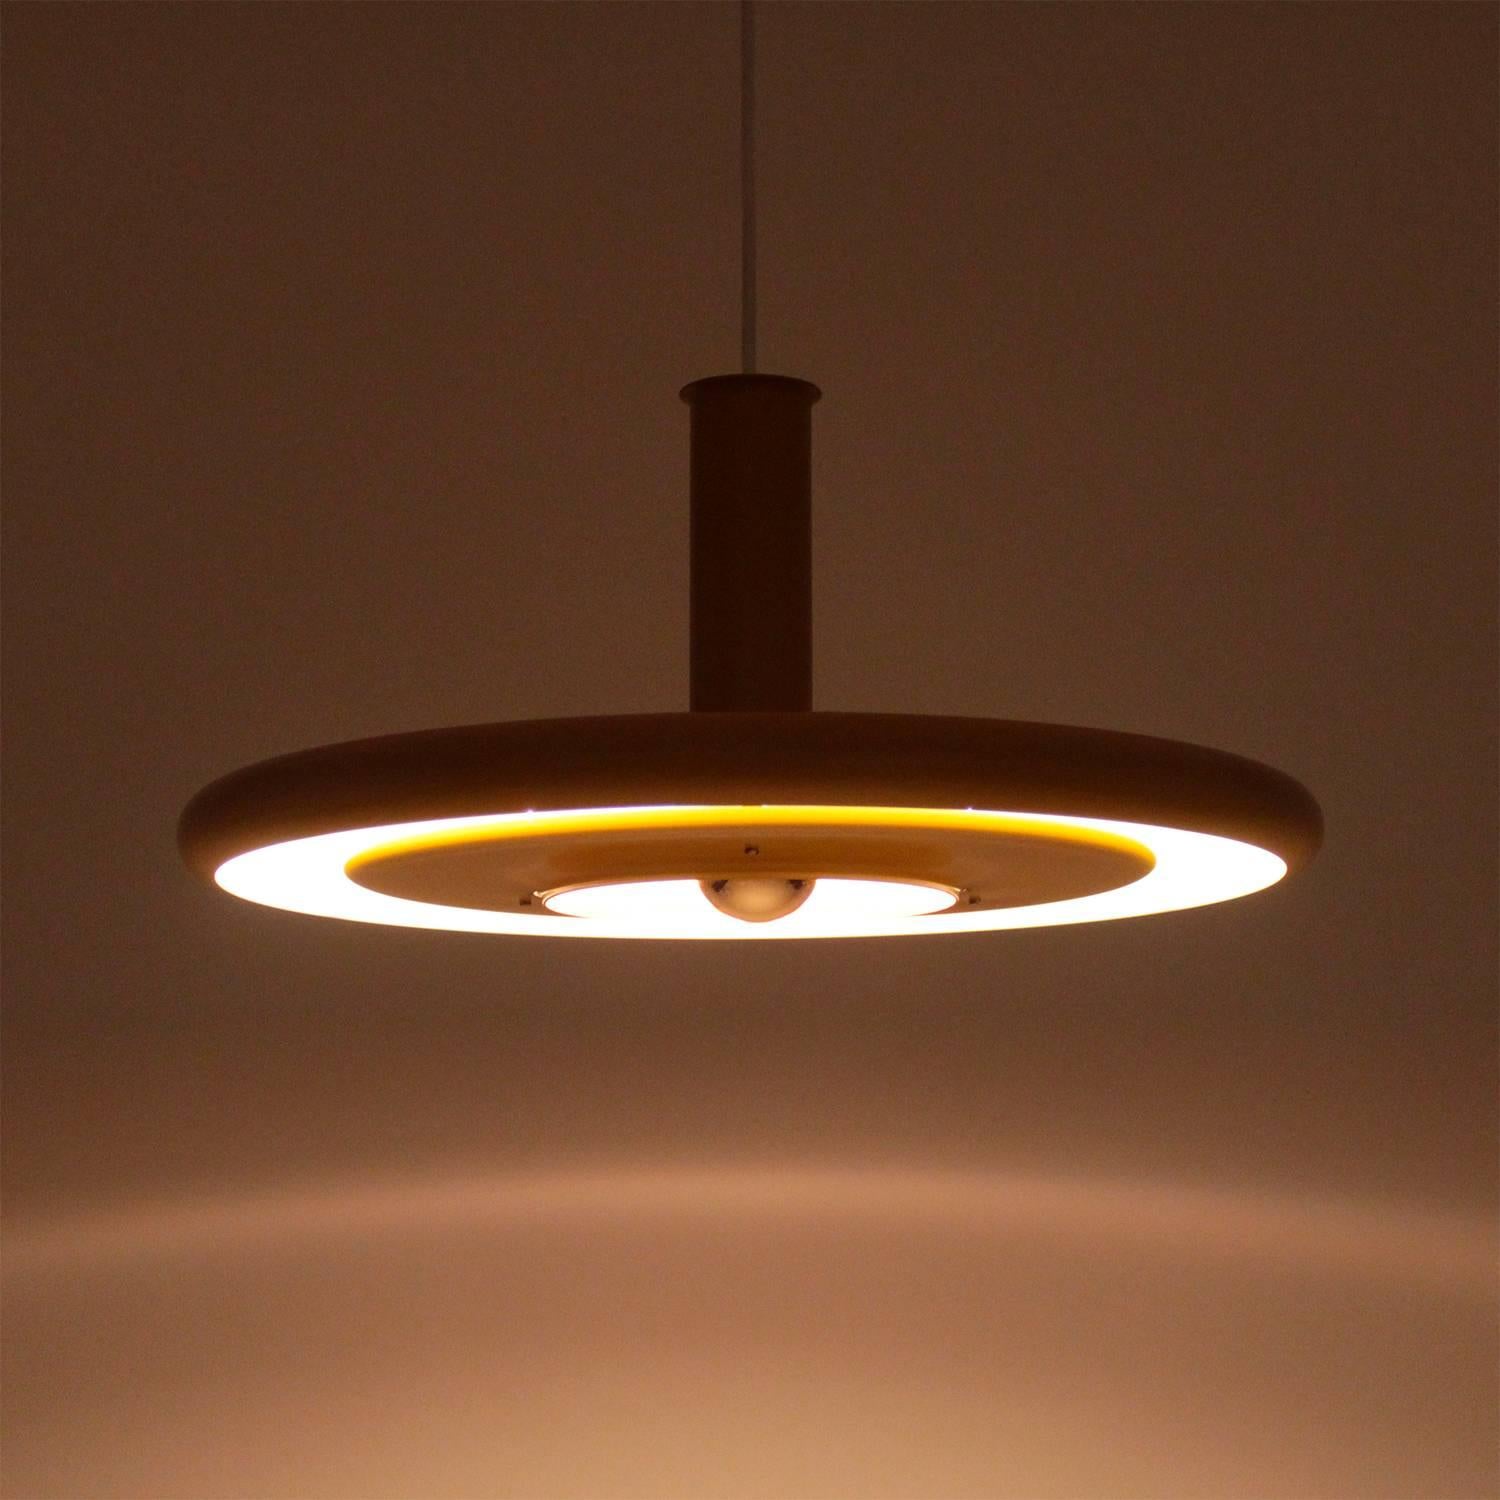 OPTIMA 6, yellow pendant by Hans Due for Fog & Mørup in 1972, large yellow and white hanging light in very good vintage condition.

A beautiful pendant characterized by its soft lines, clearly influenced by Space Age design - it features a large